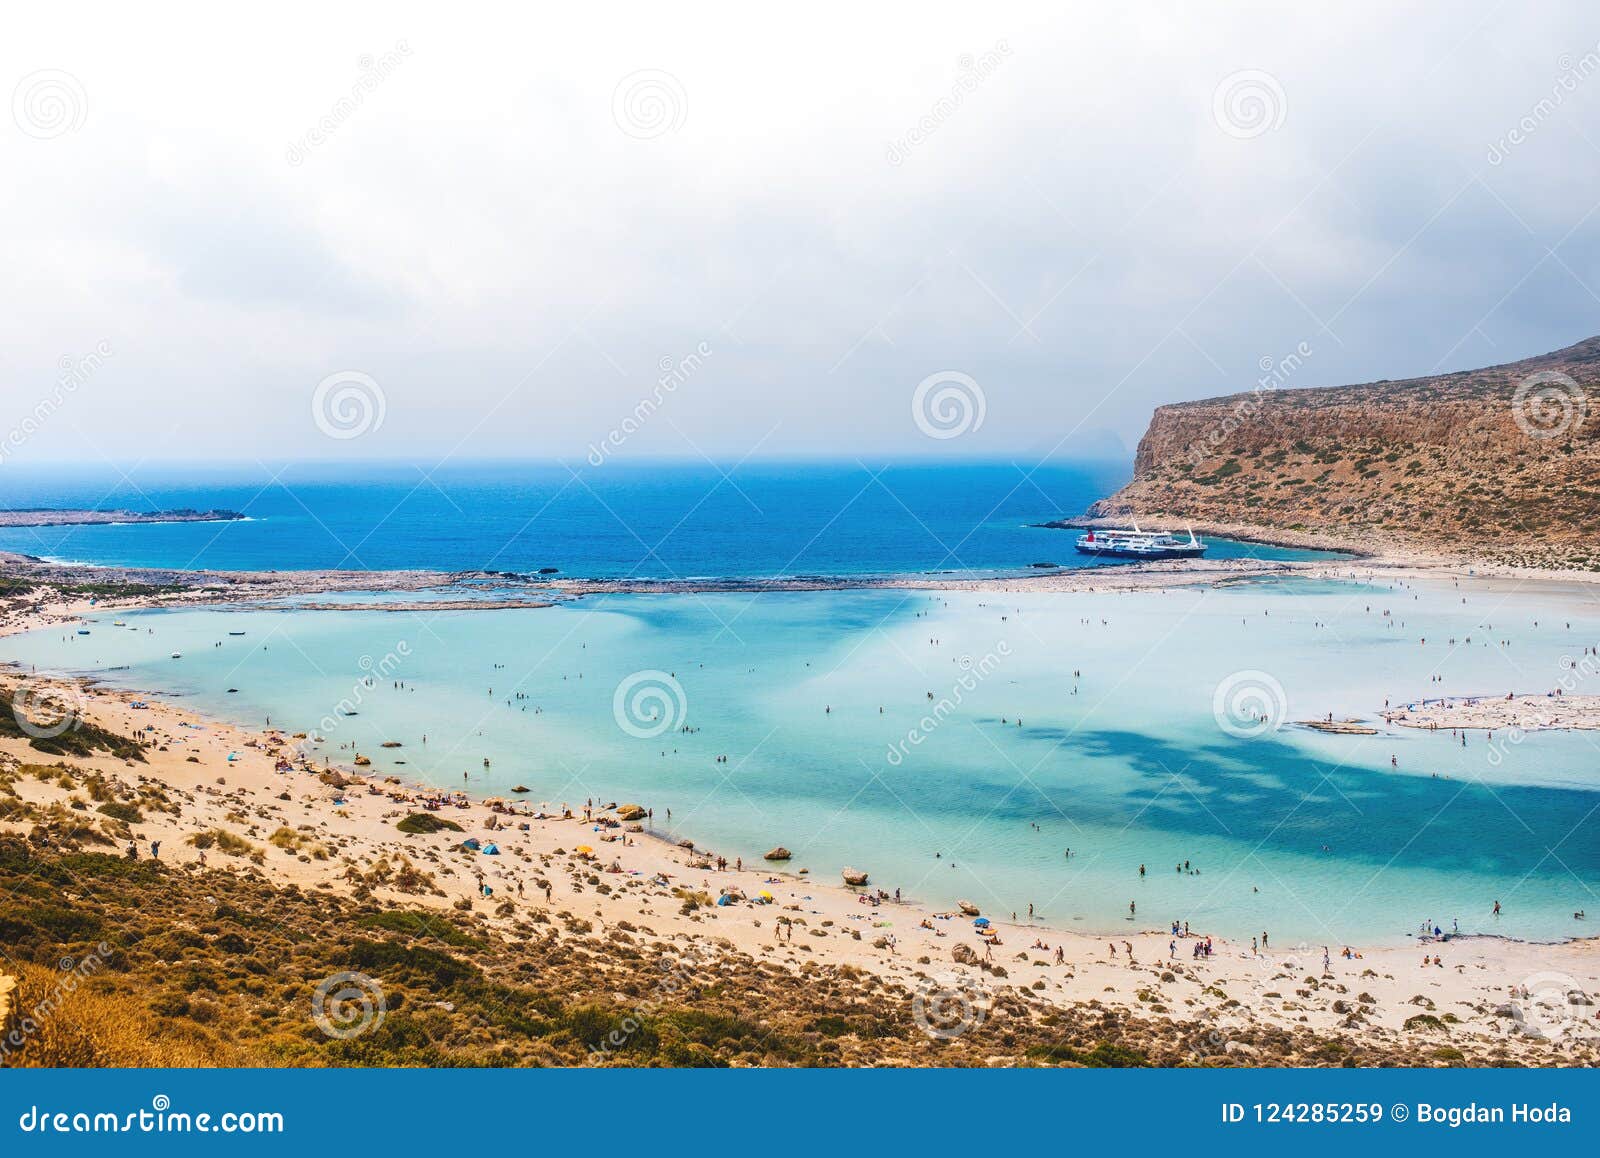 balos island in crete, greece. landscape of mediterranean sea with diferent shades of turquoise